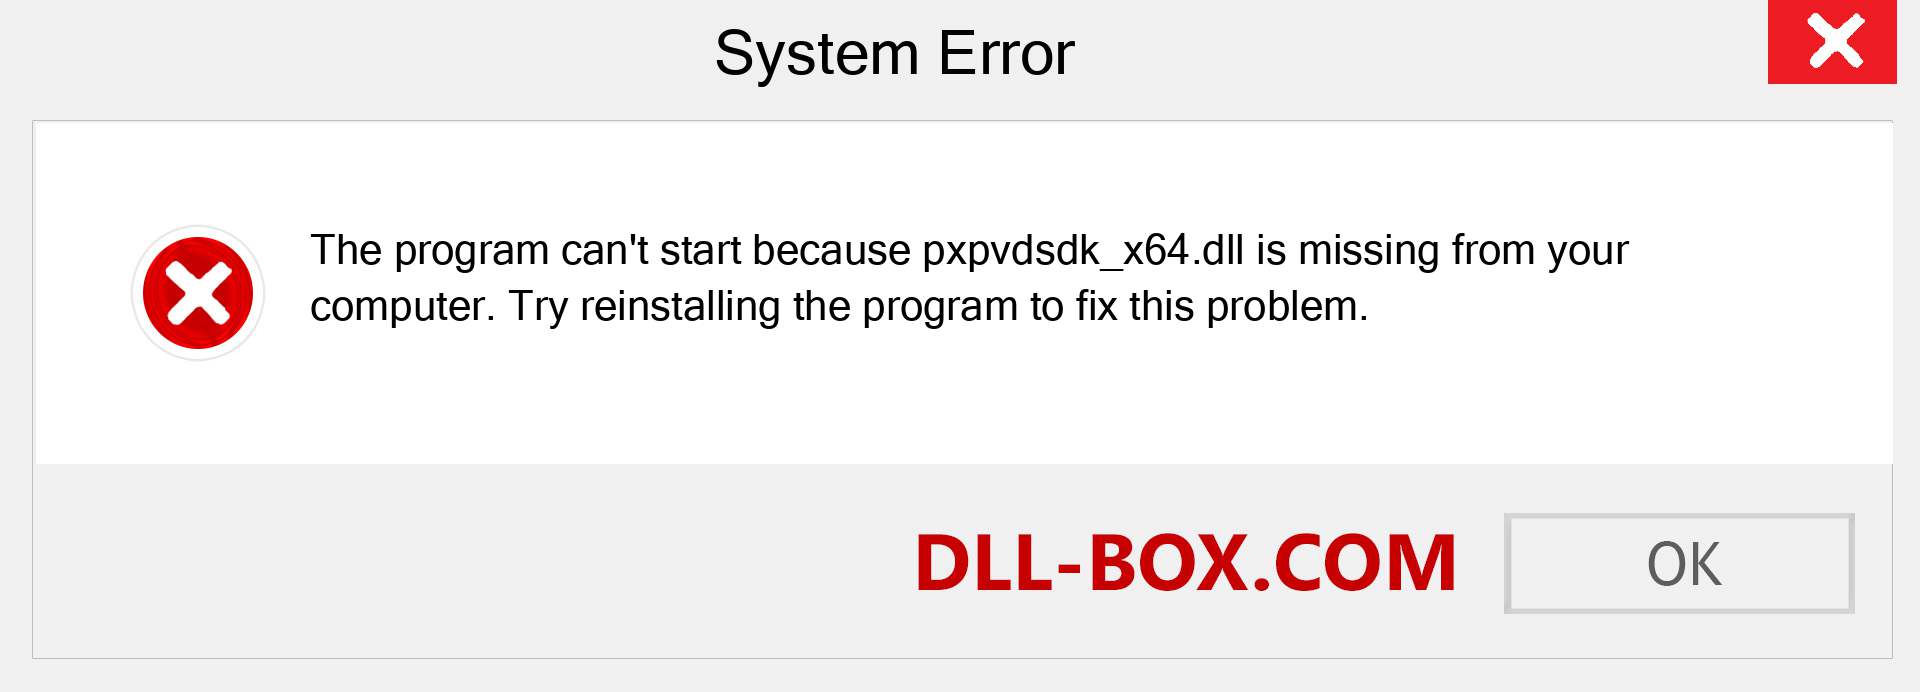  pxpvdsdk_x64.dll file is missing?. Download for Windows 7, 8, 10 - Fix  pxpvdsdk_x64 dll Missing Error on Windows, photos, images